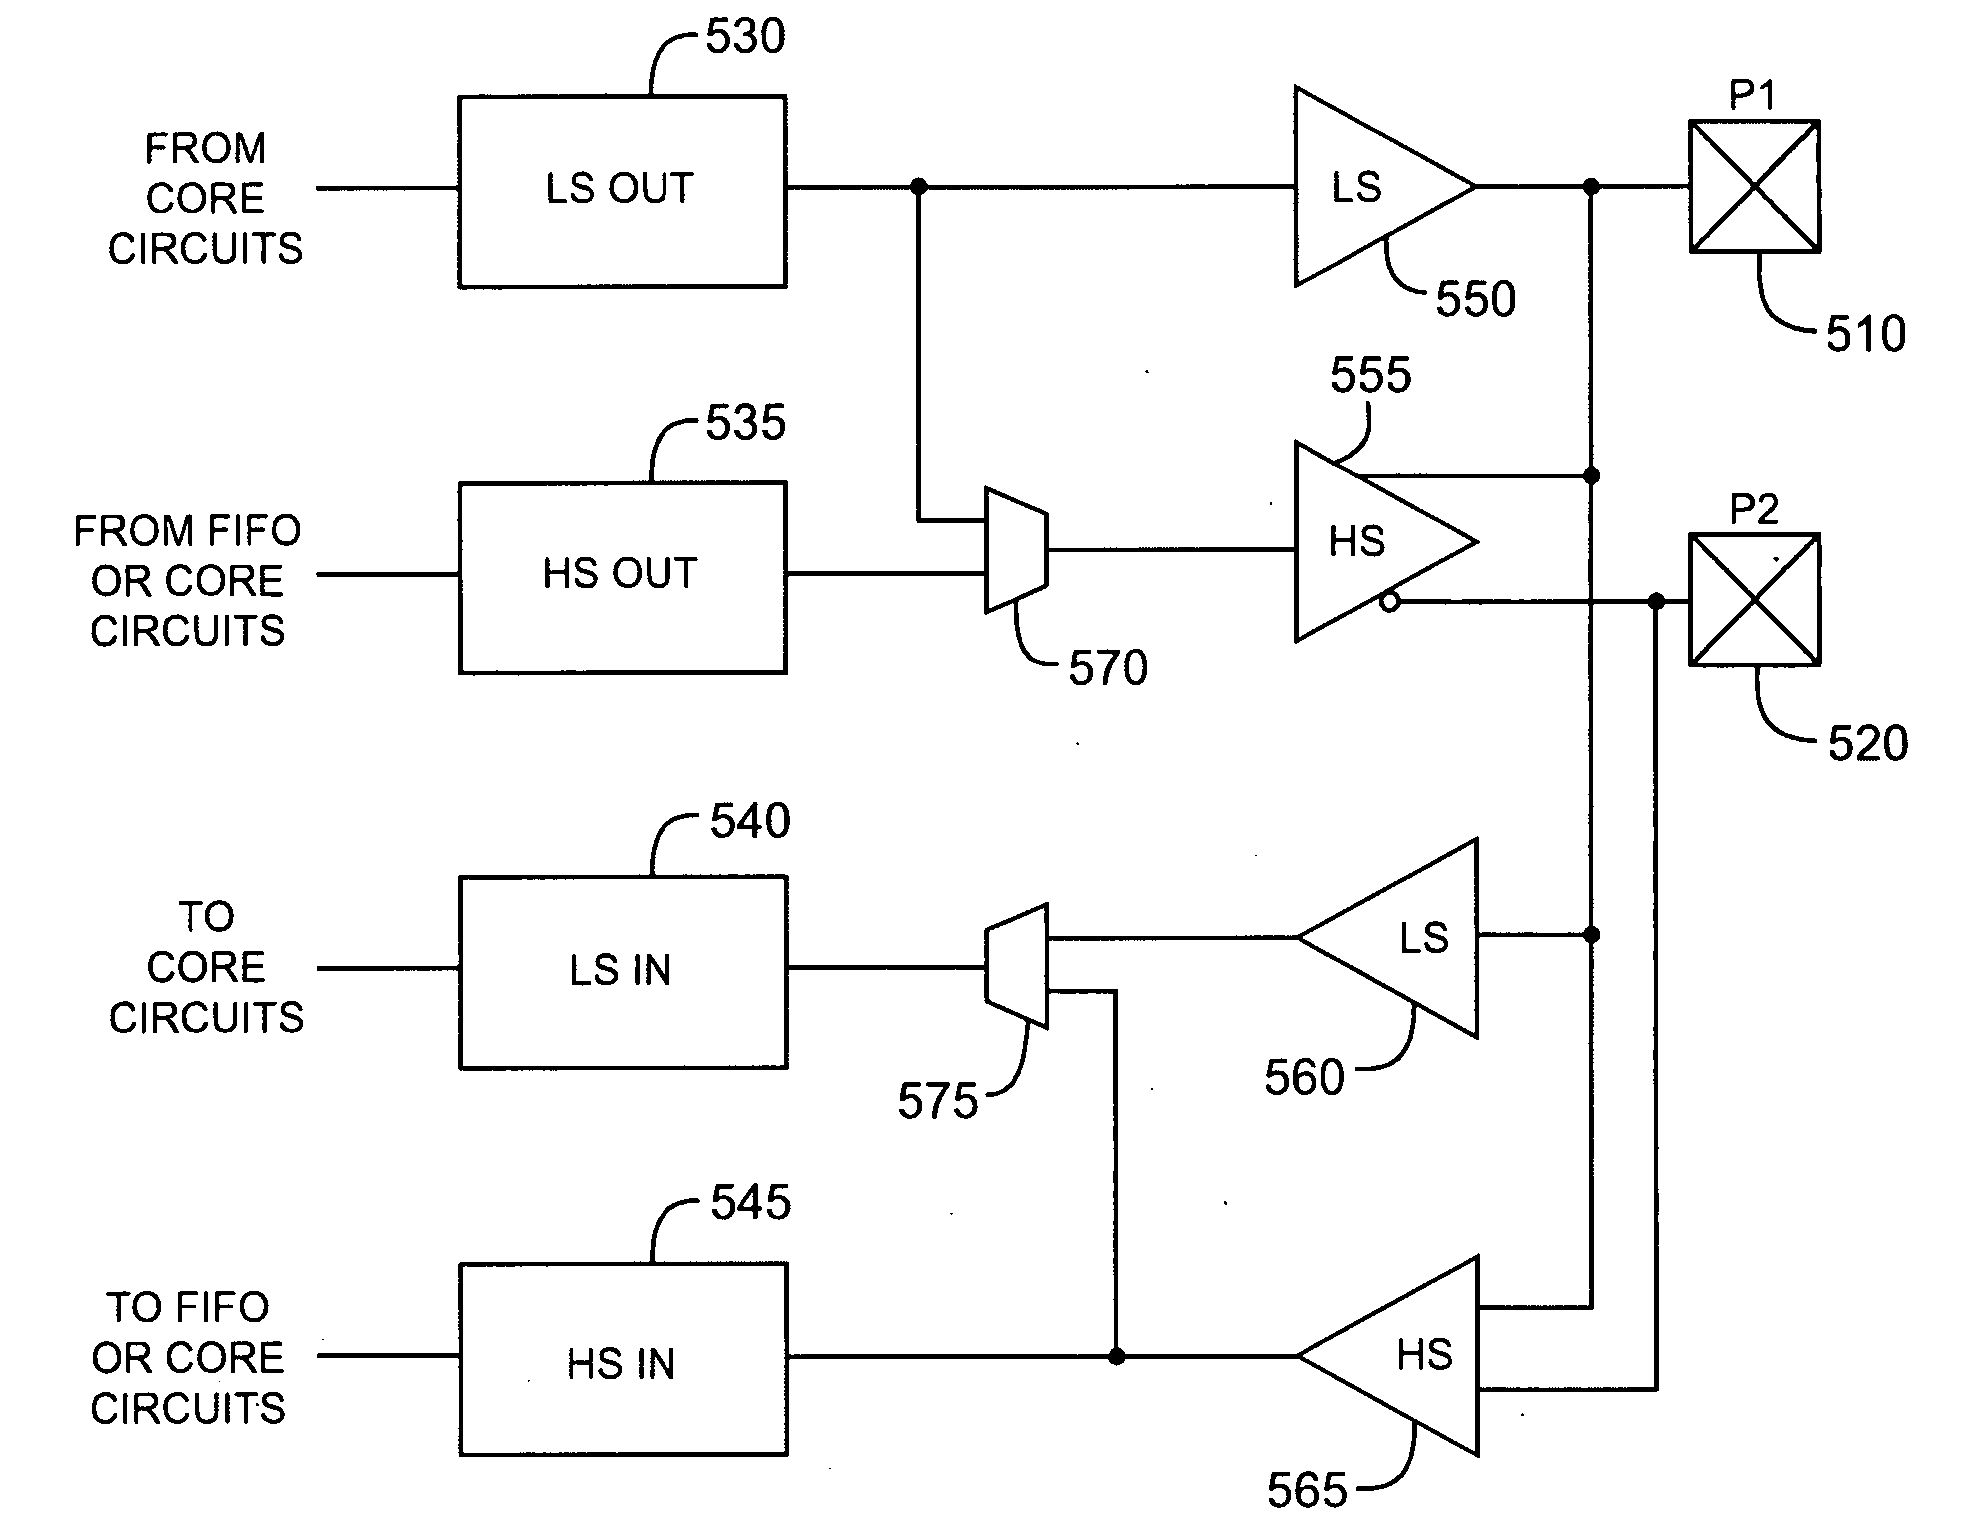 Programmable high speed I/O interface